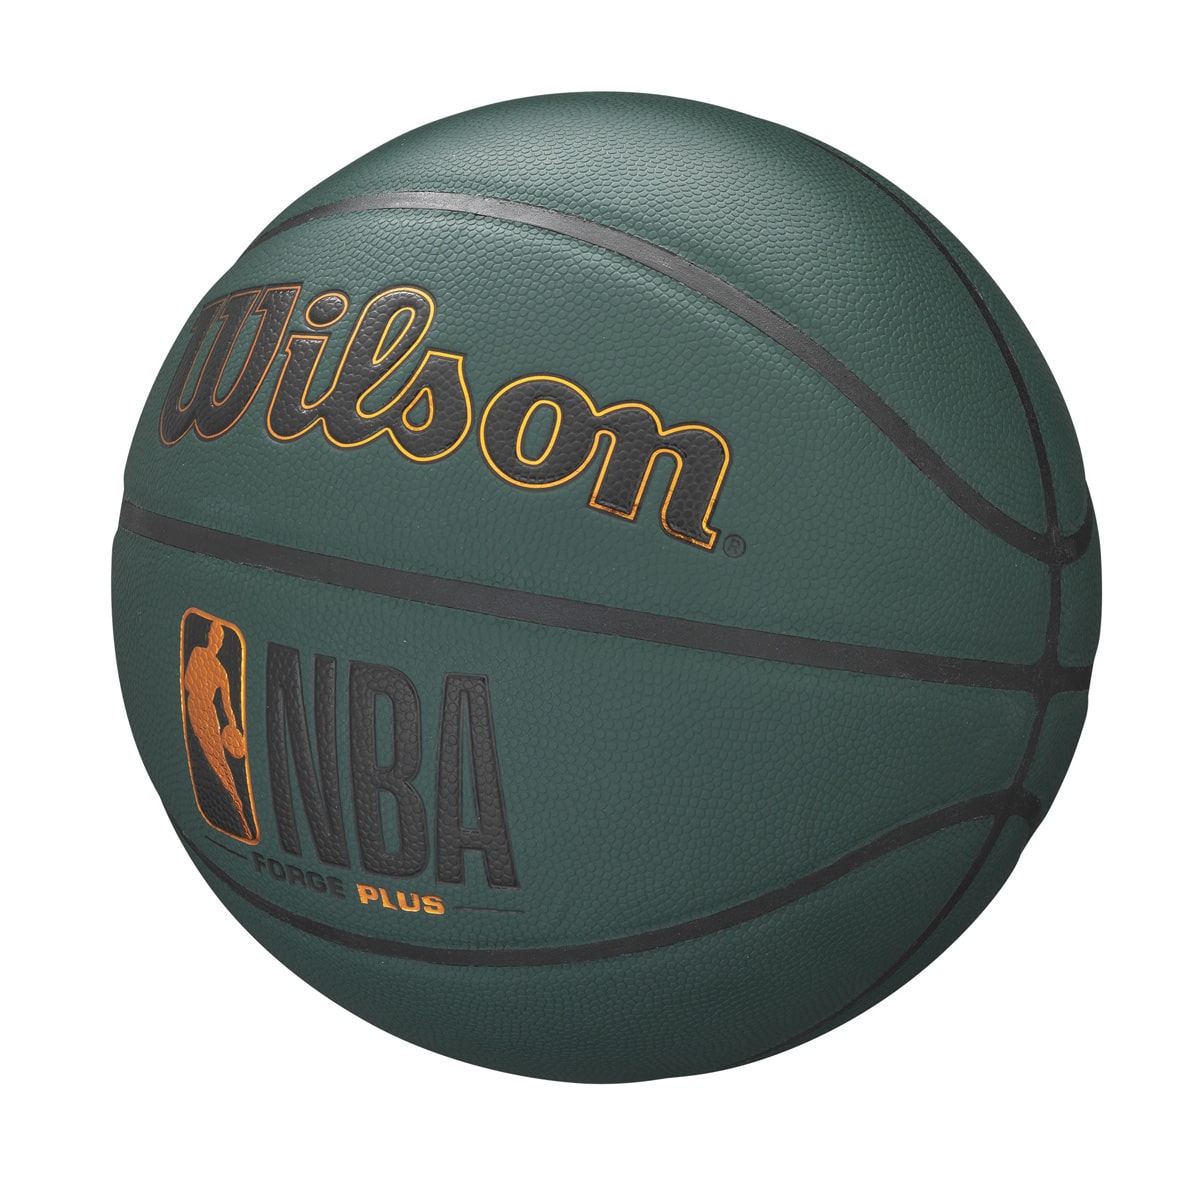 WTB8103EC_2_7_07_NBA_Forge_Plus_Official_ForestGreen.png.high-res-min